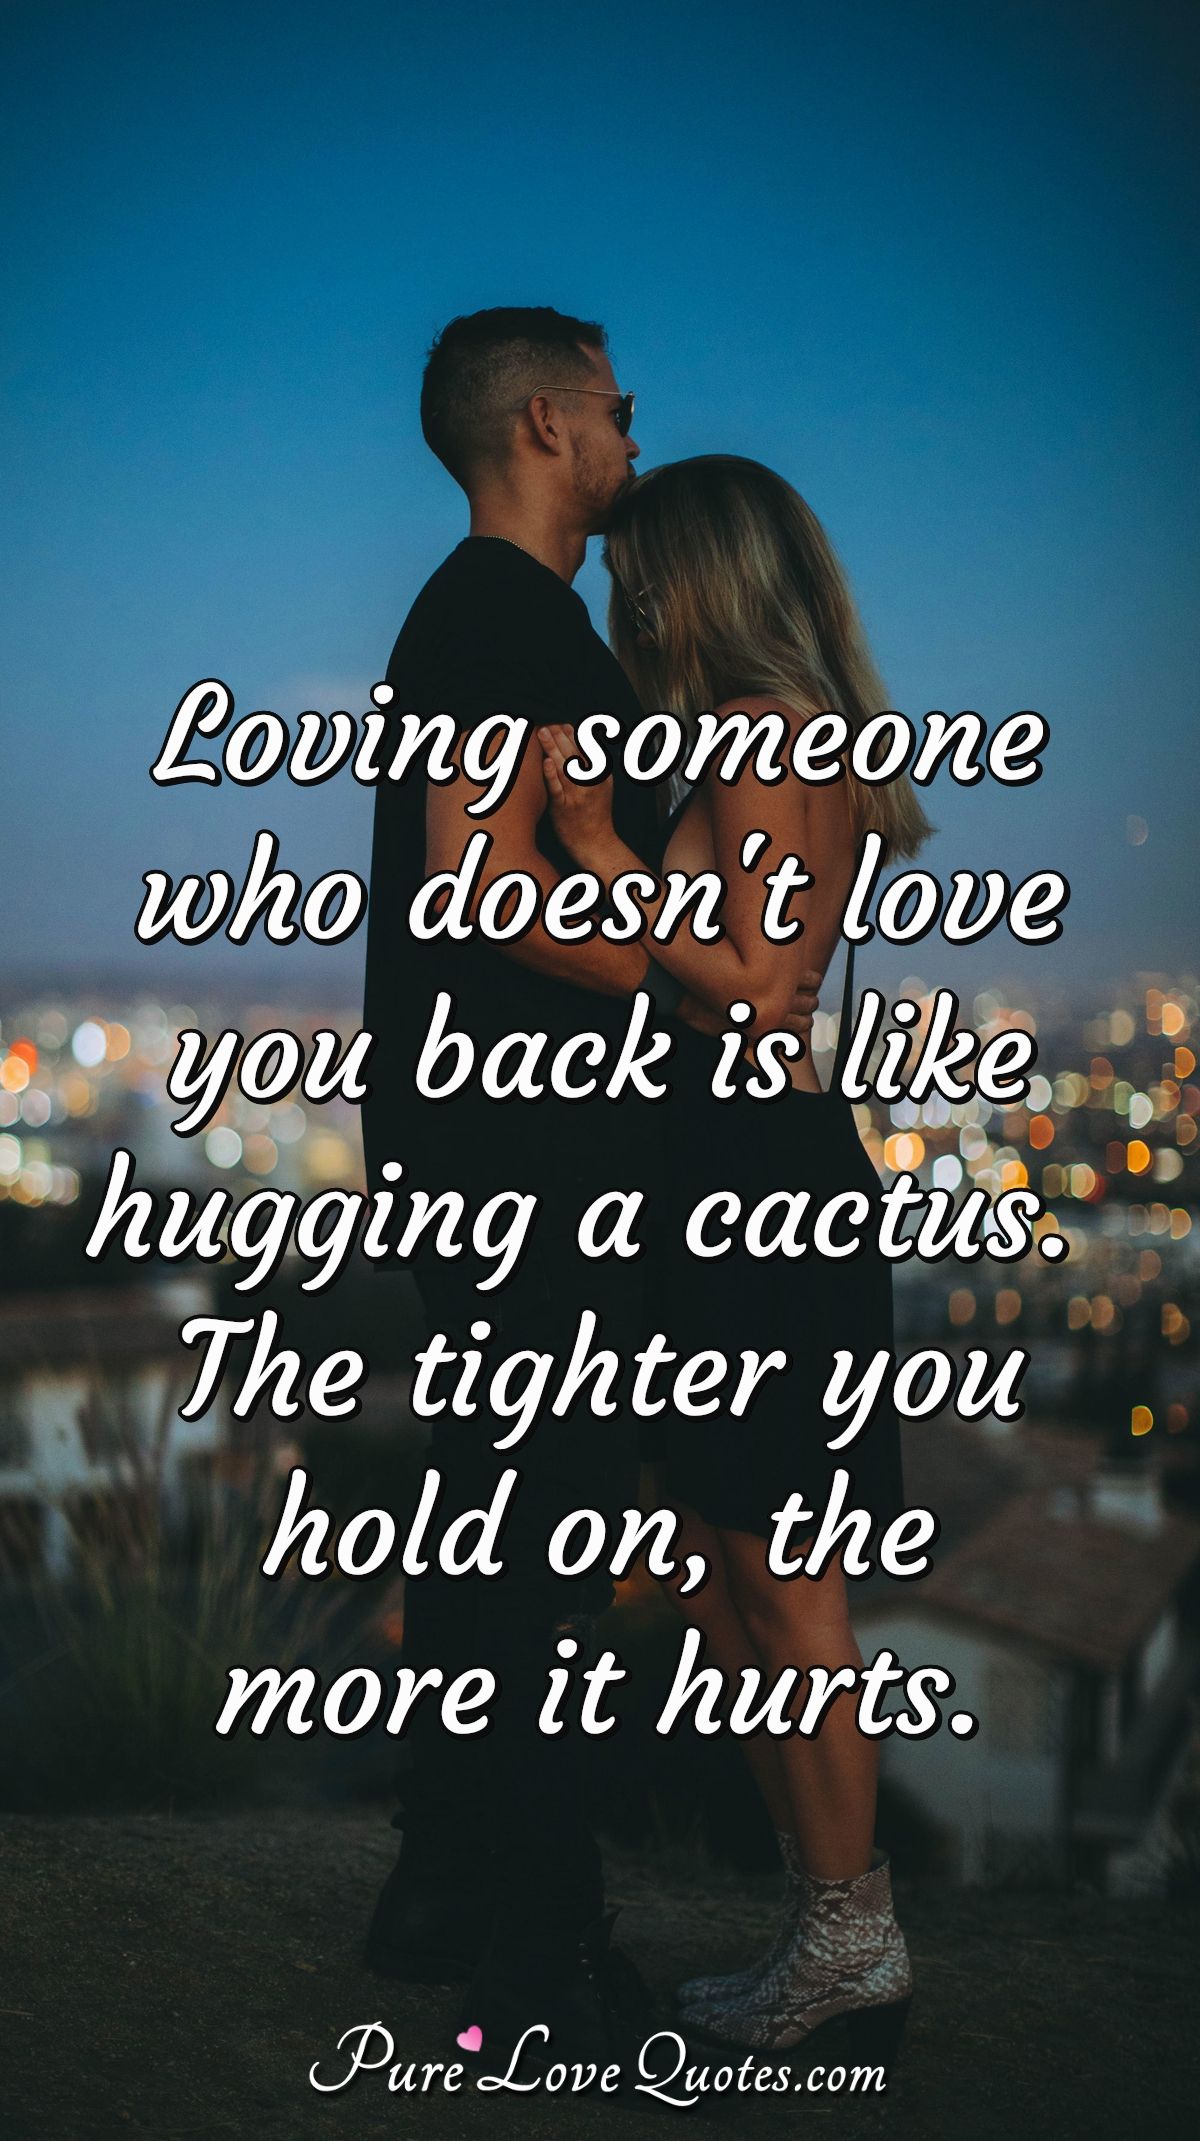 Loving Someone Who Doesn't Love You Back Is Like Hugging A Cactus. The Tighter ... | Purelovequotes